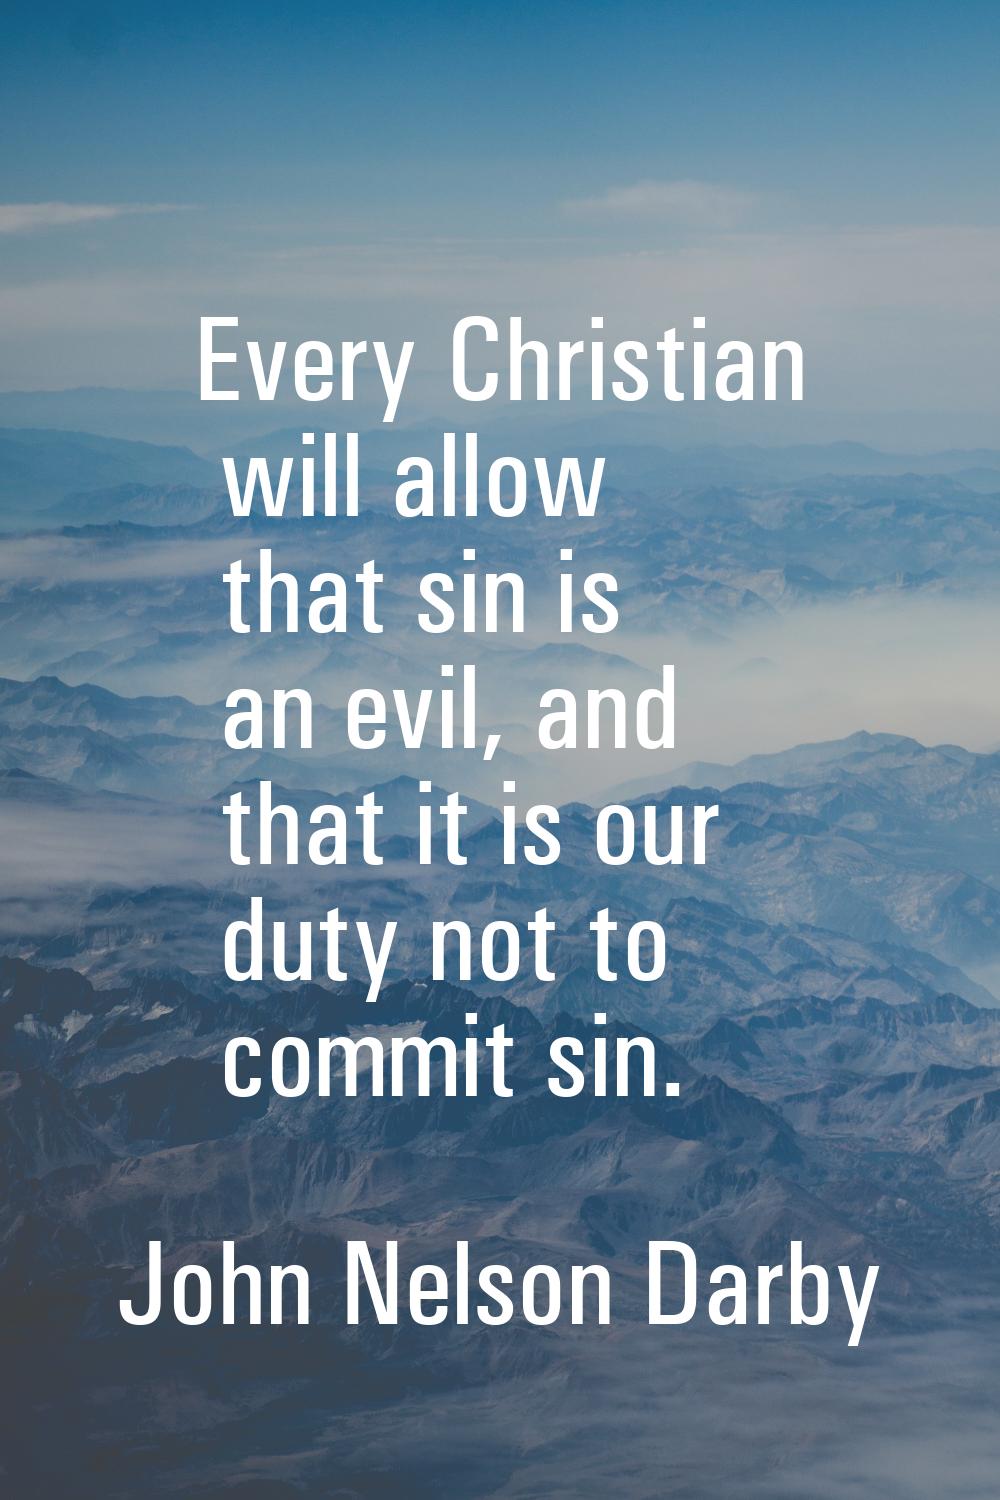 Every Christian will allow that sin is an evil, and that it is our duty not to commit sin.